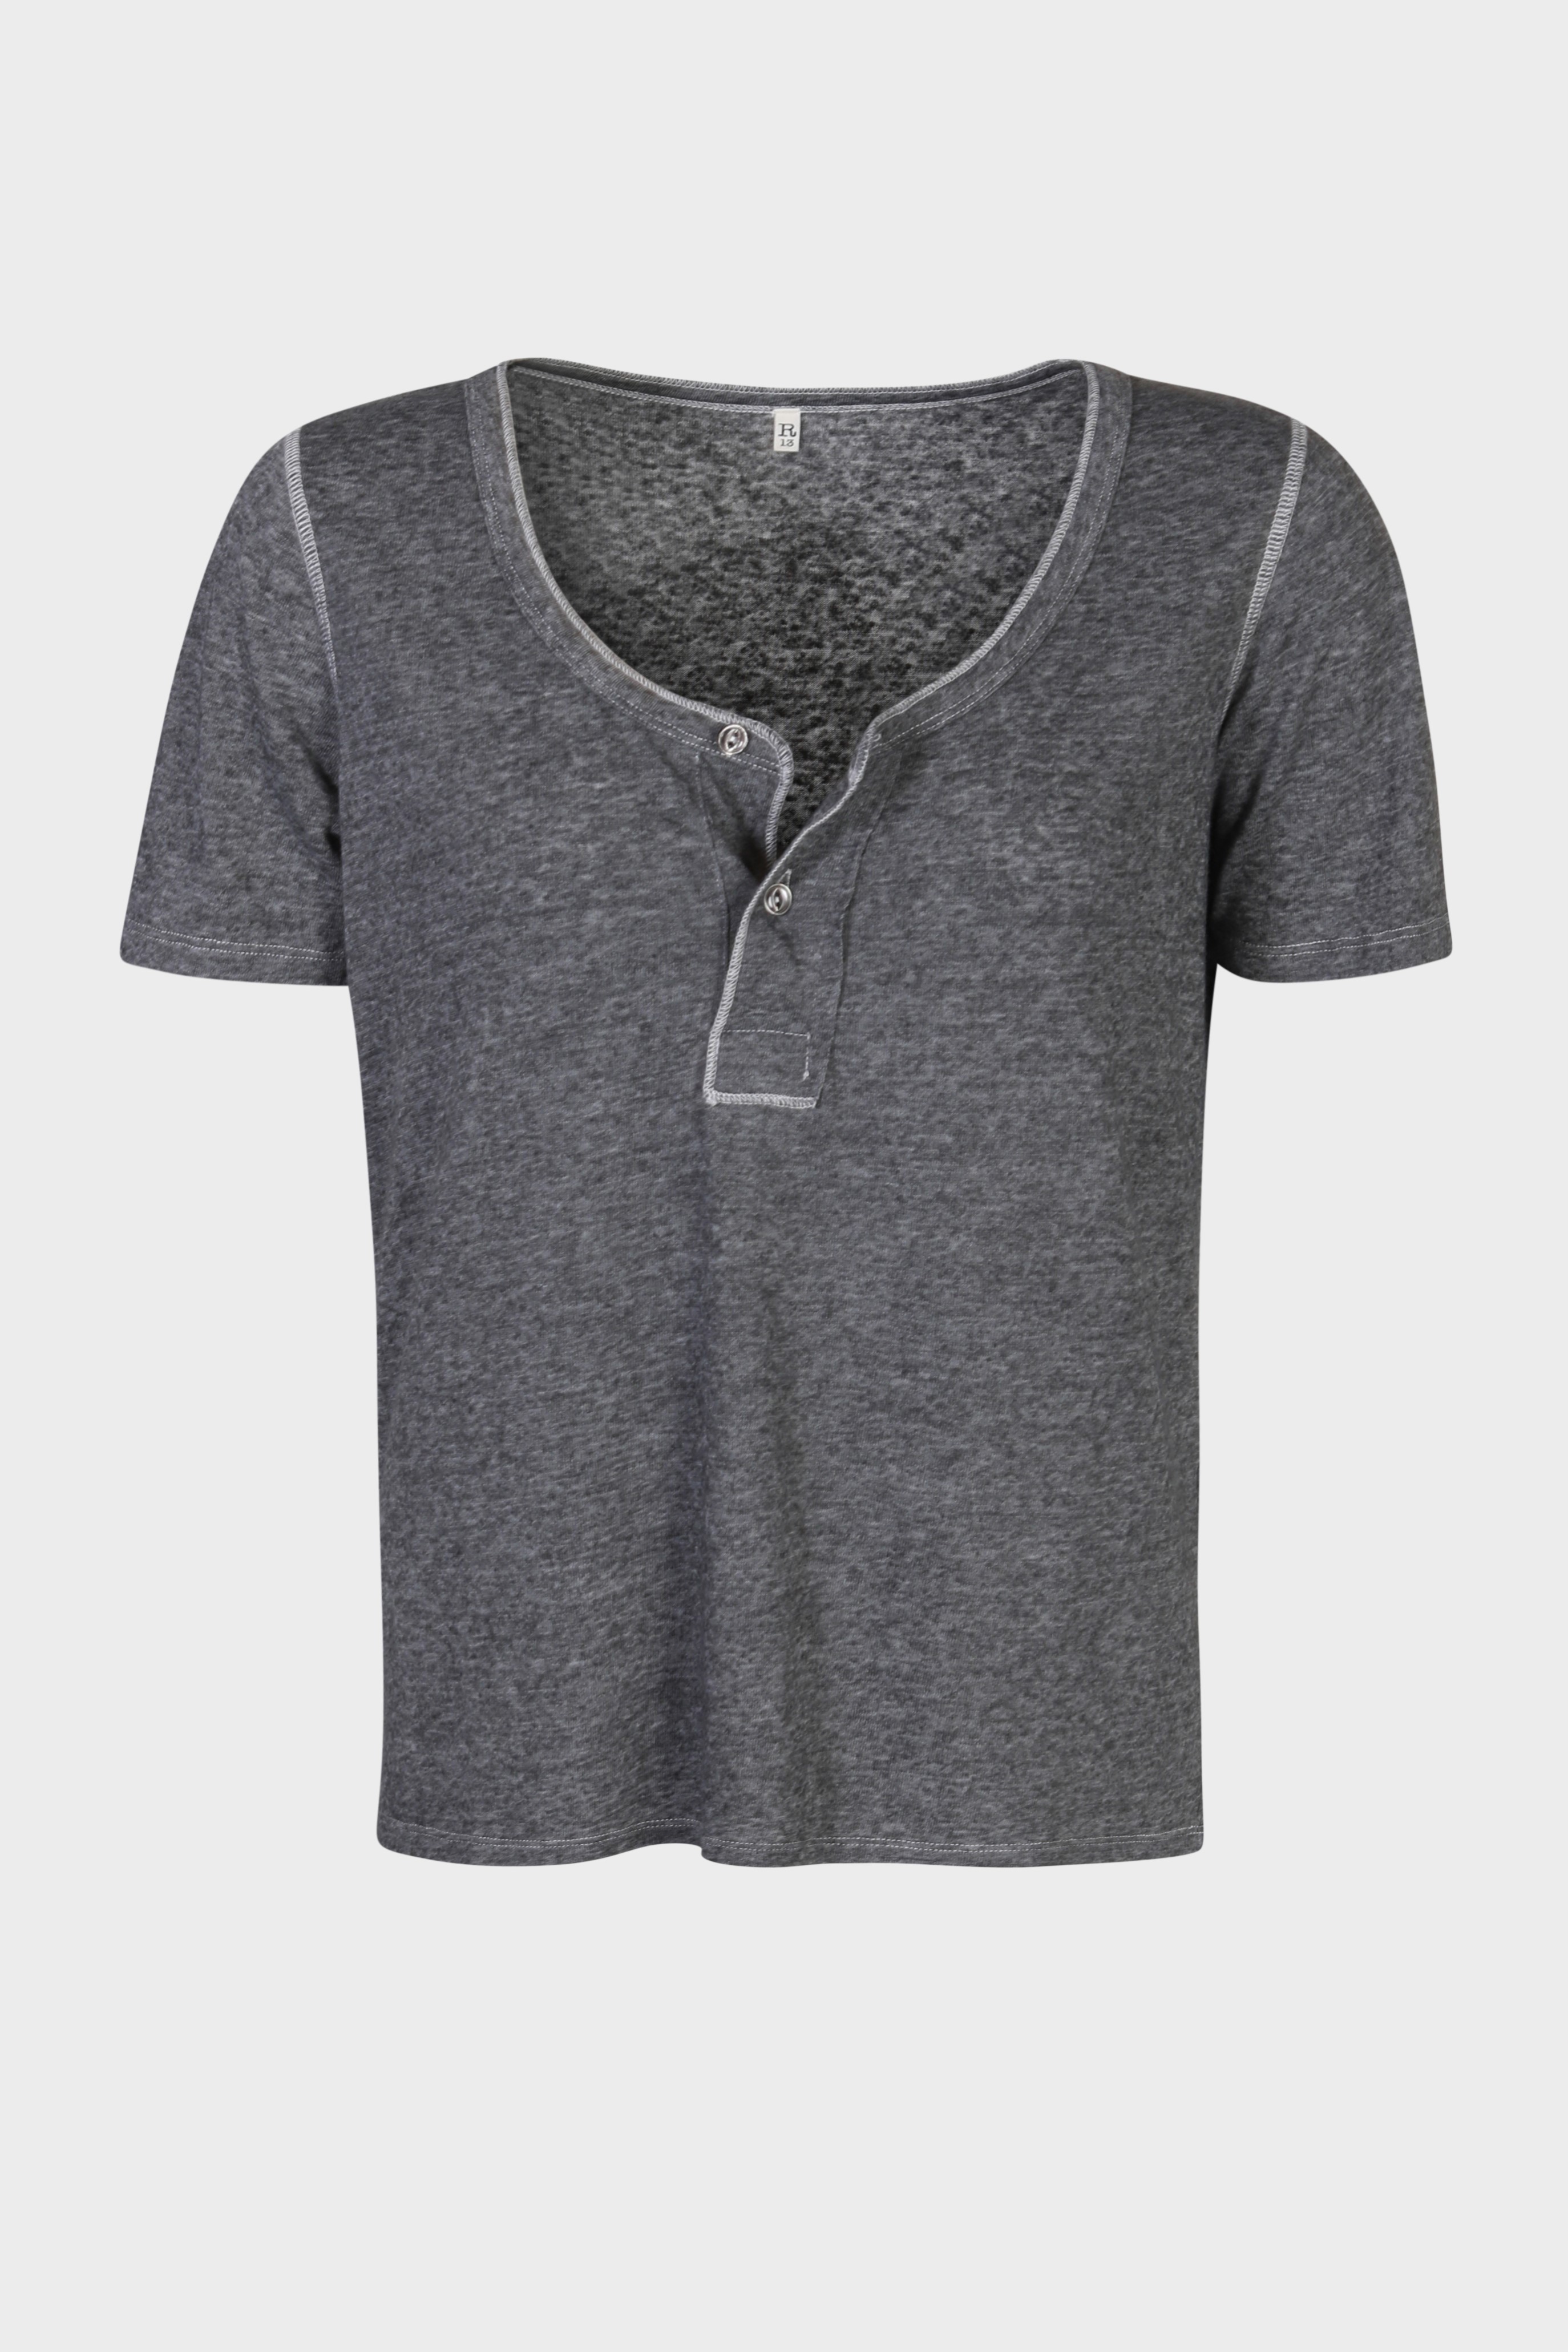 R13 Low Neck Henley Tee in Charcoal